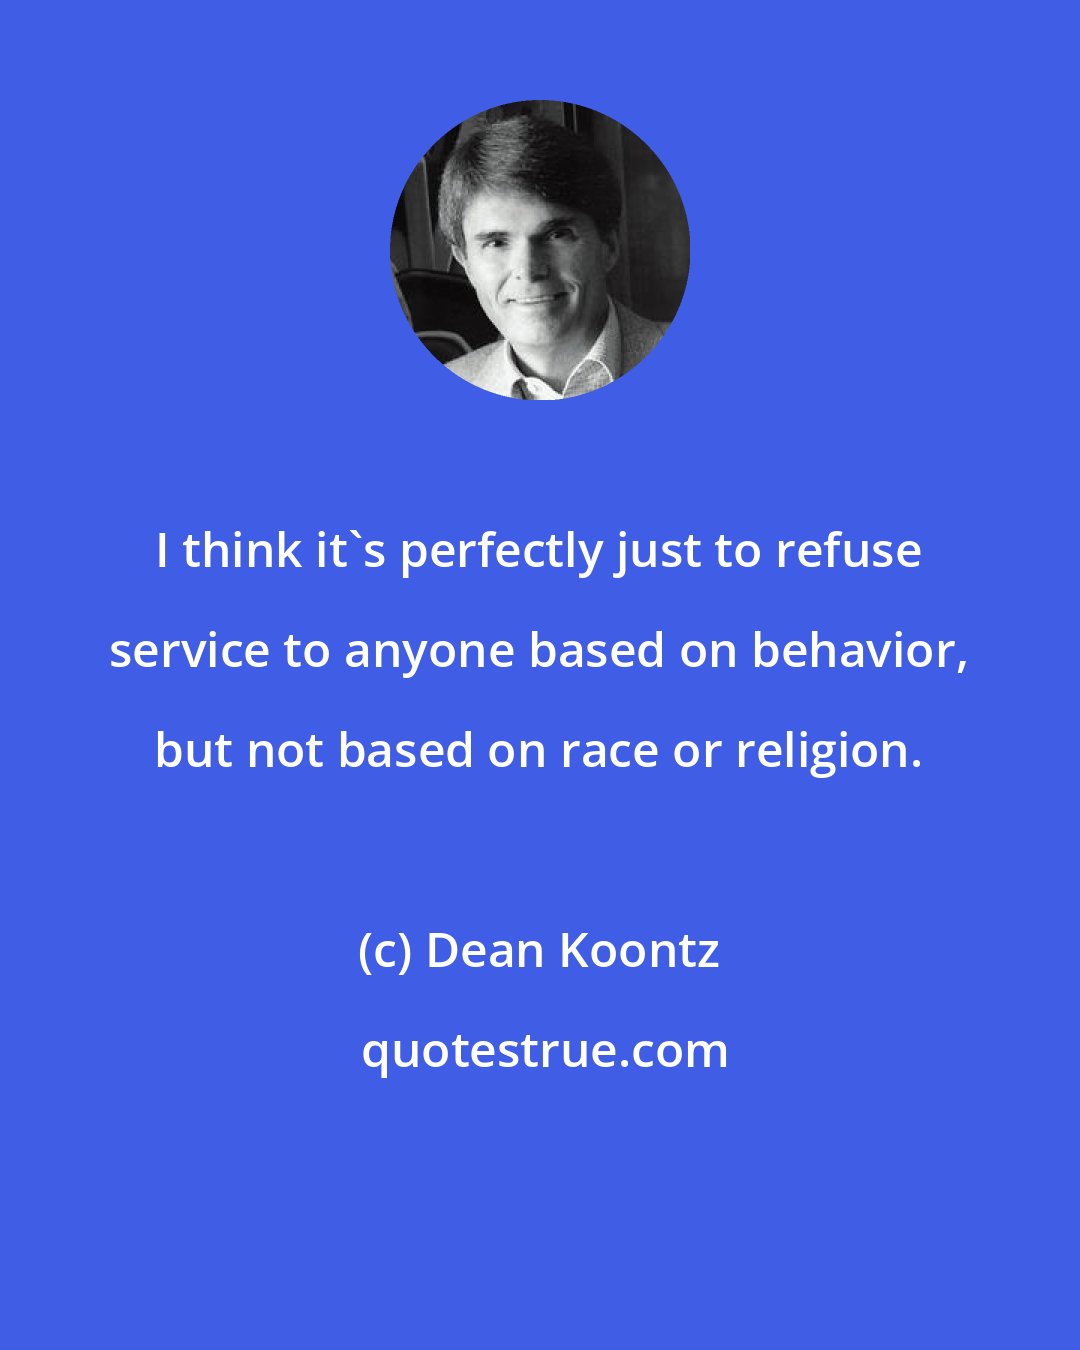 Dean Koontz: I think it's perfectly just to refuse service to anyone based on behavior, but not based on race or religion.